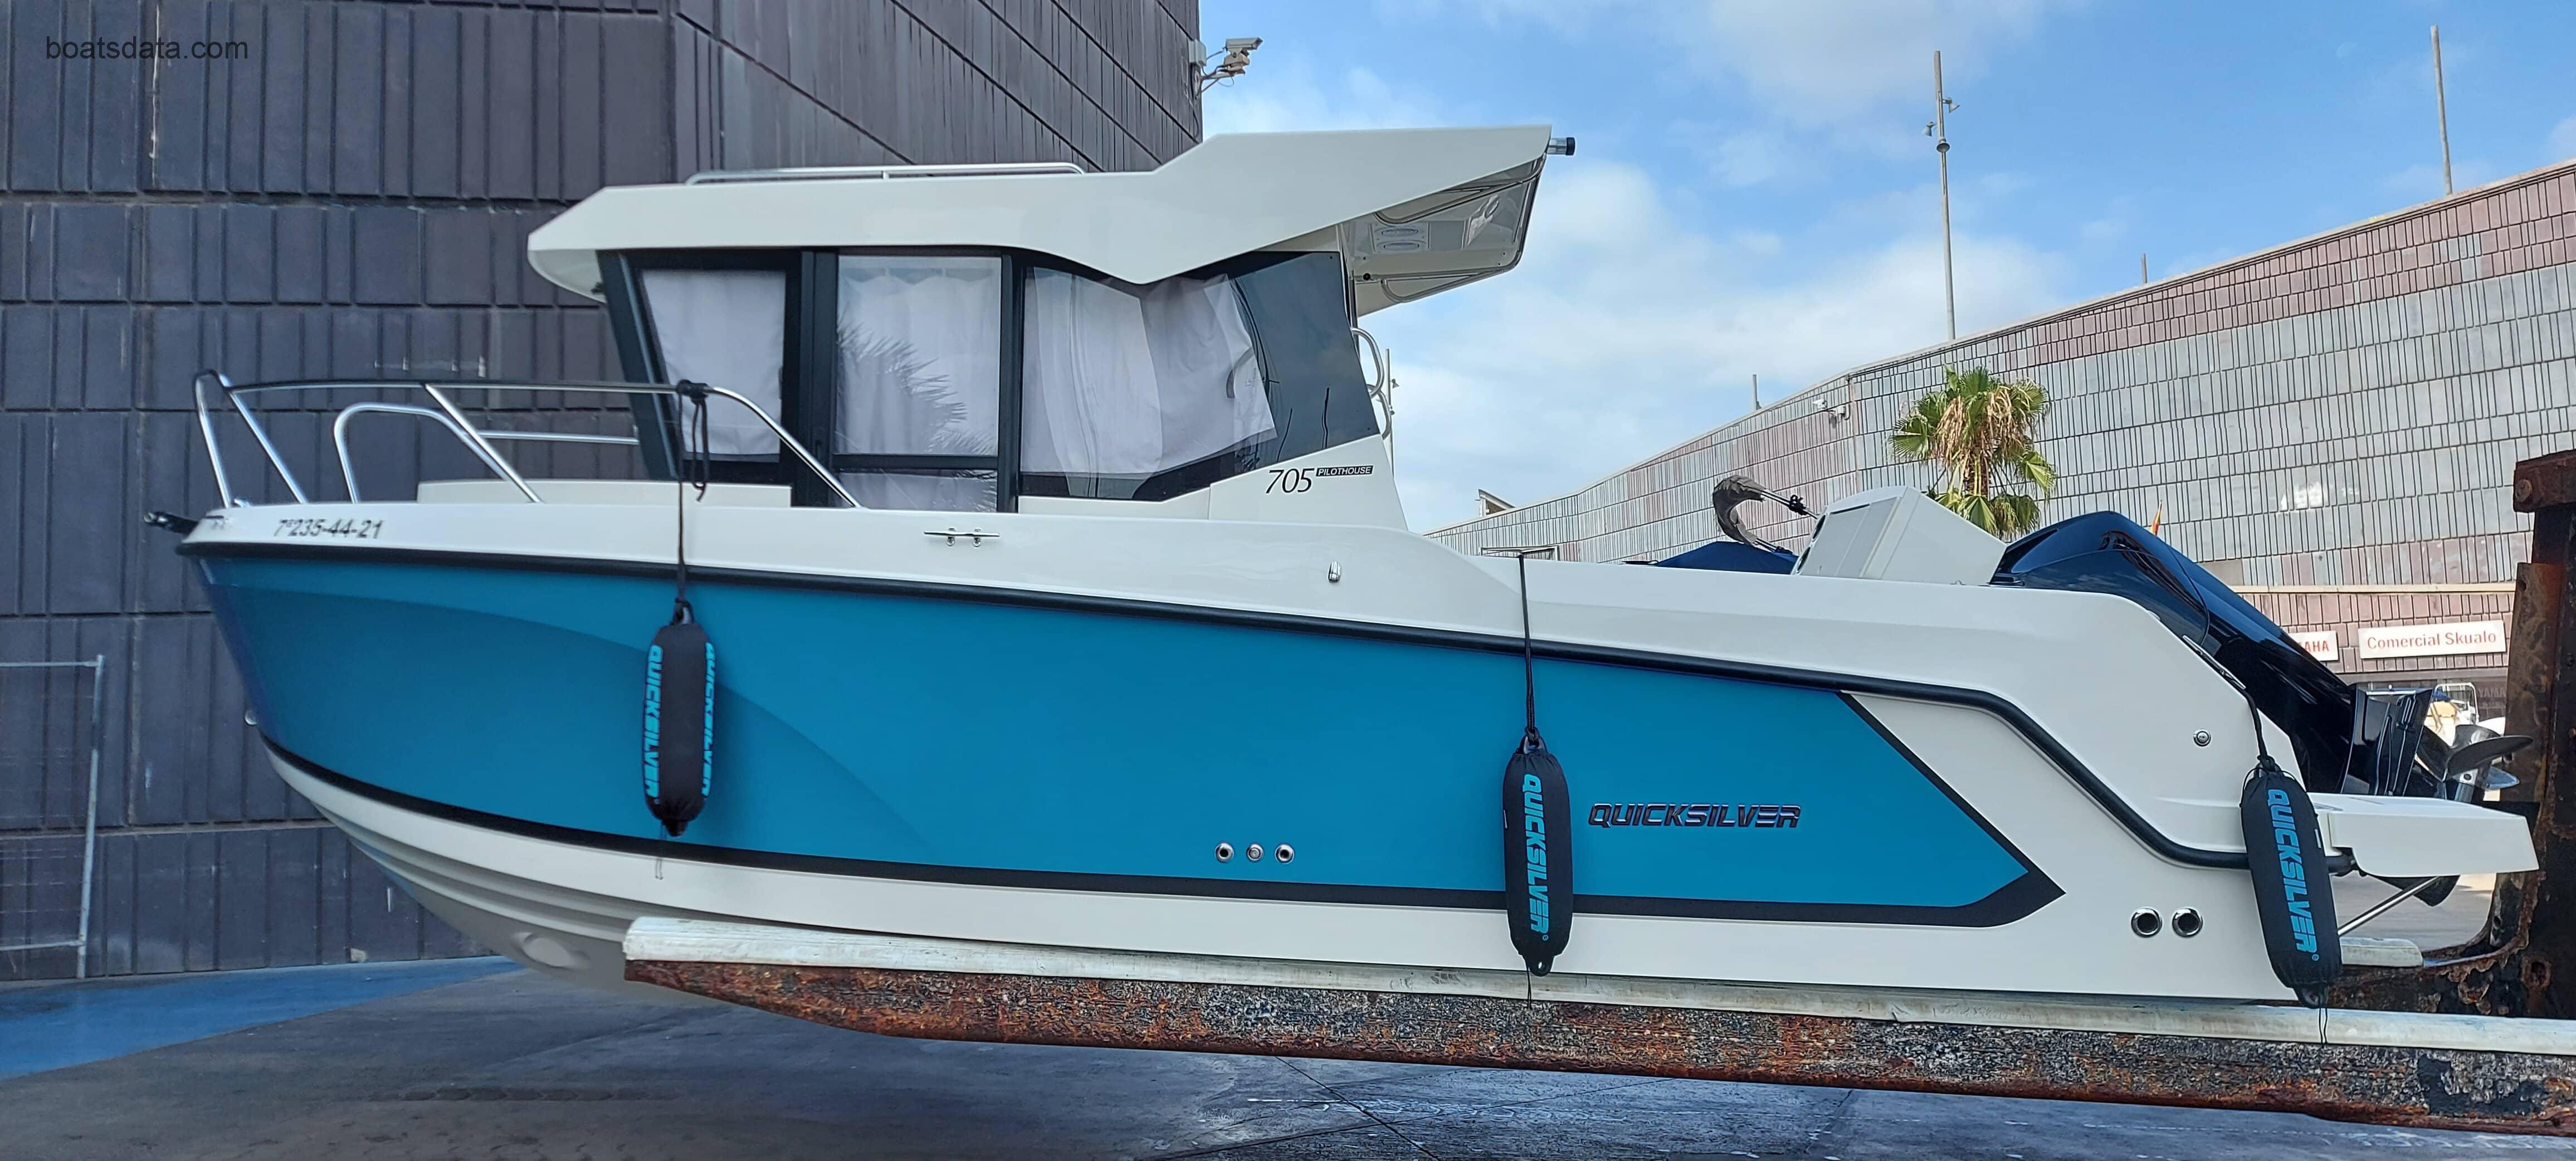 Quicksilver Captur 705 Pilothouse tv detailed specifications and features